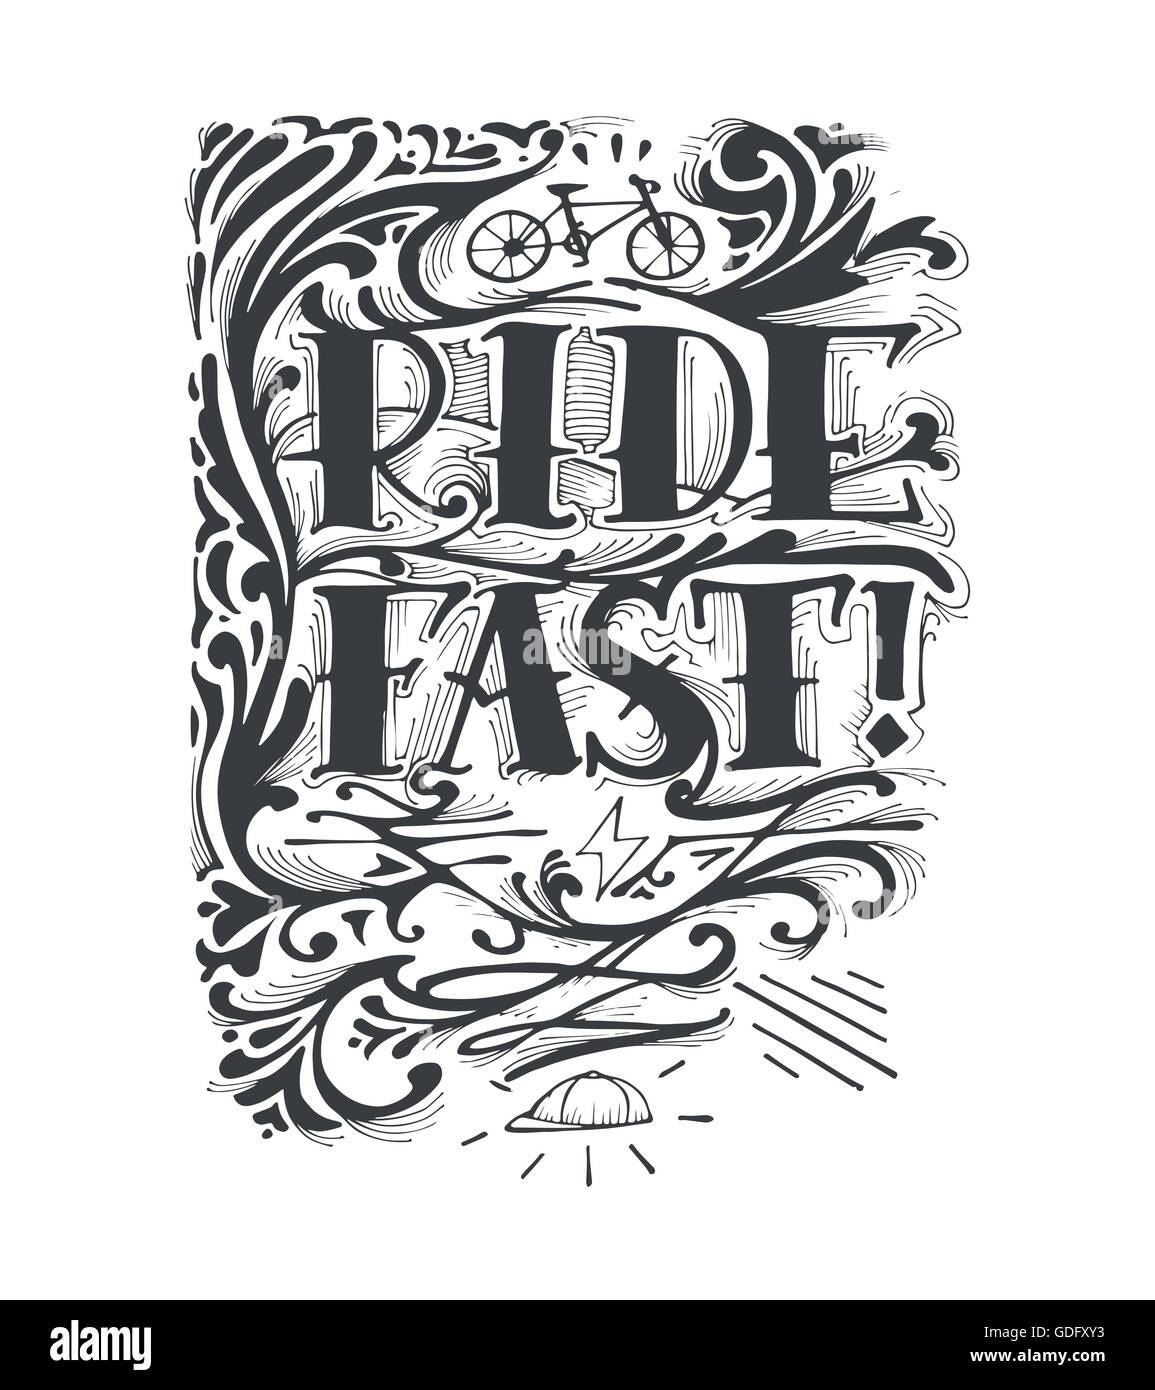 Hand drawn illustration or drawing of the phrase: Ride fast Stock Photo